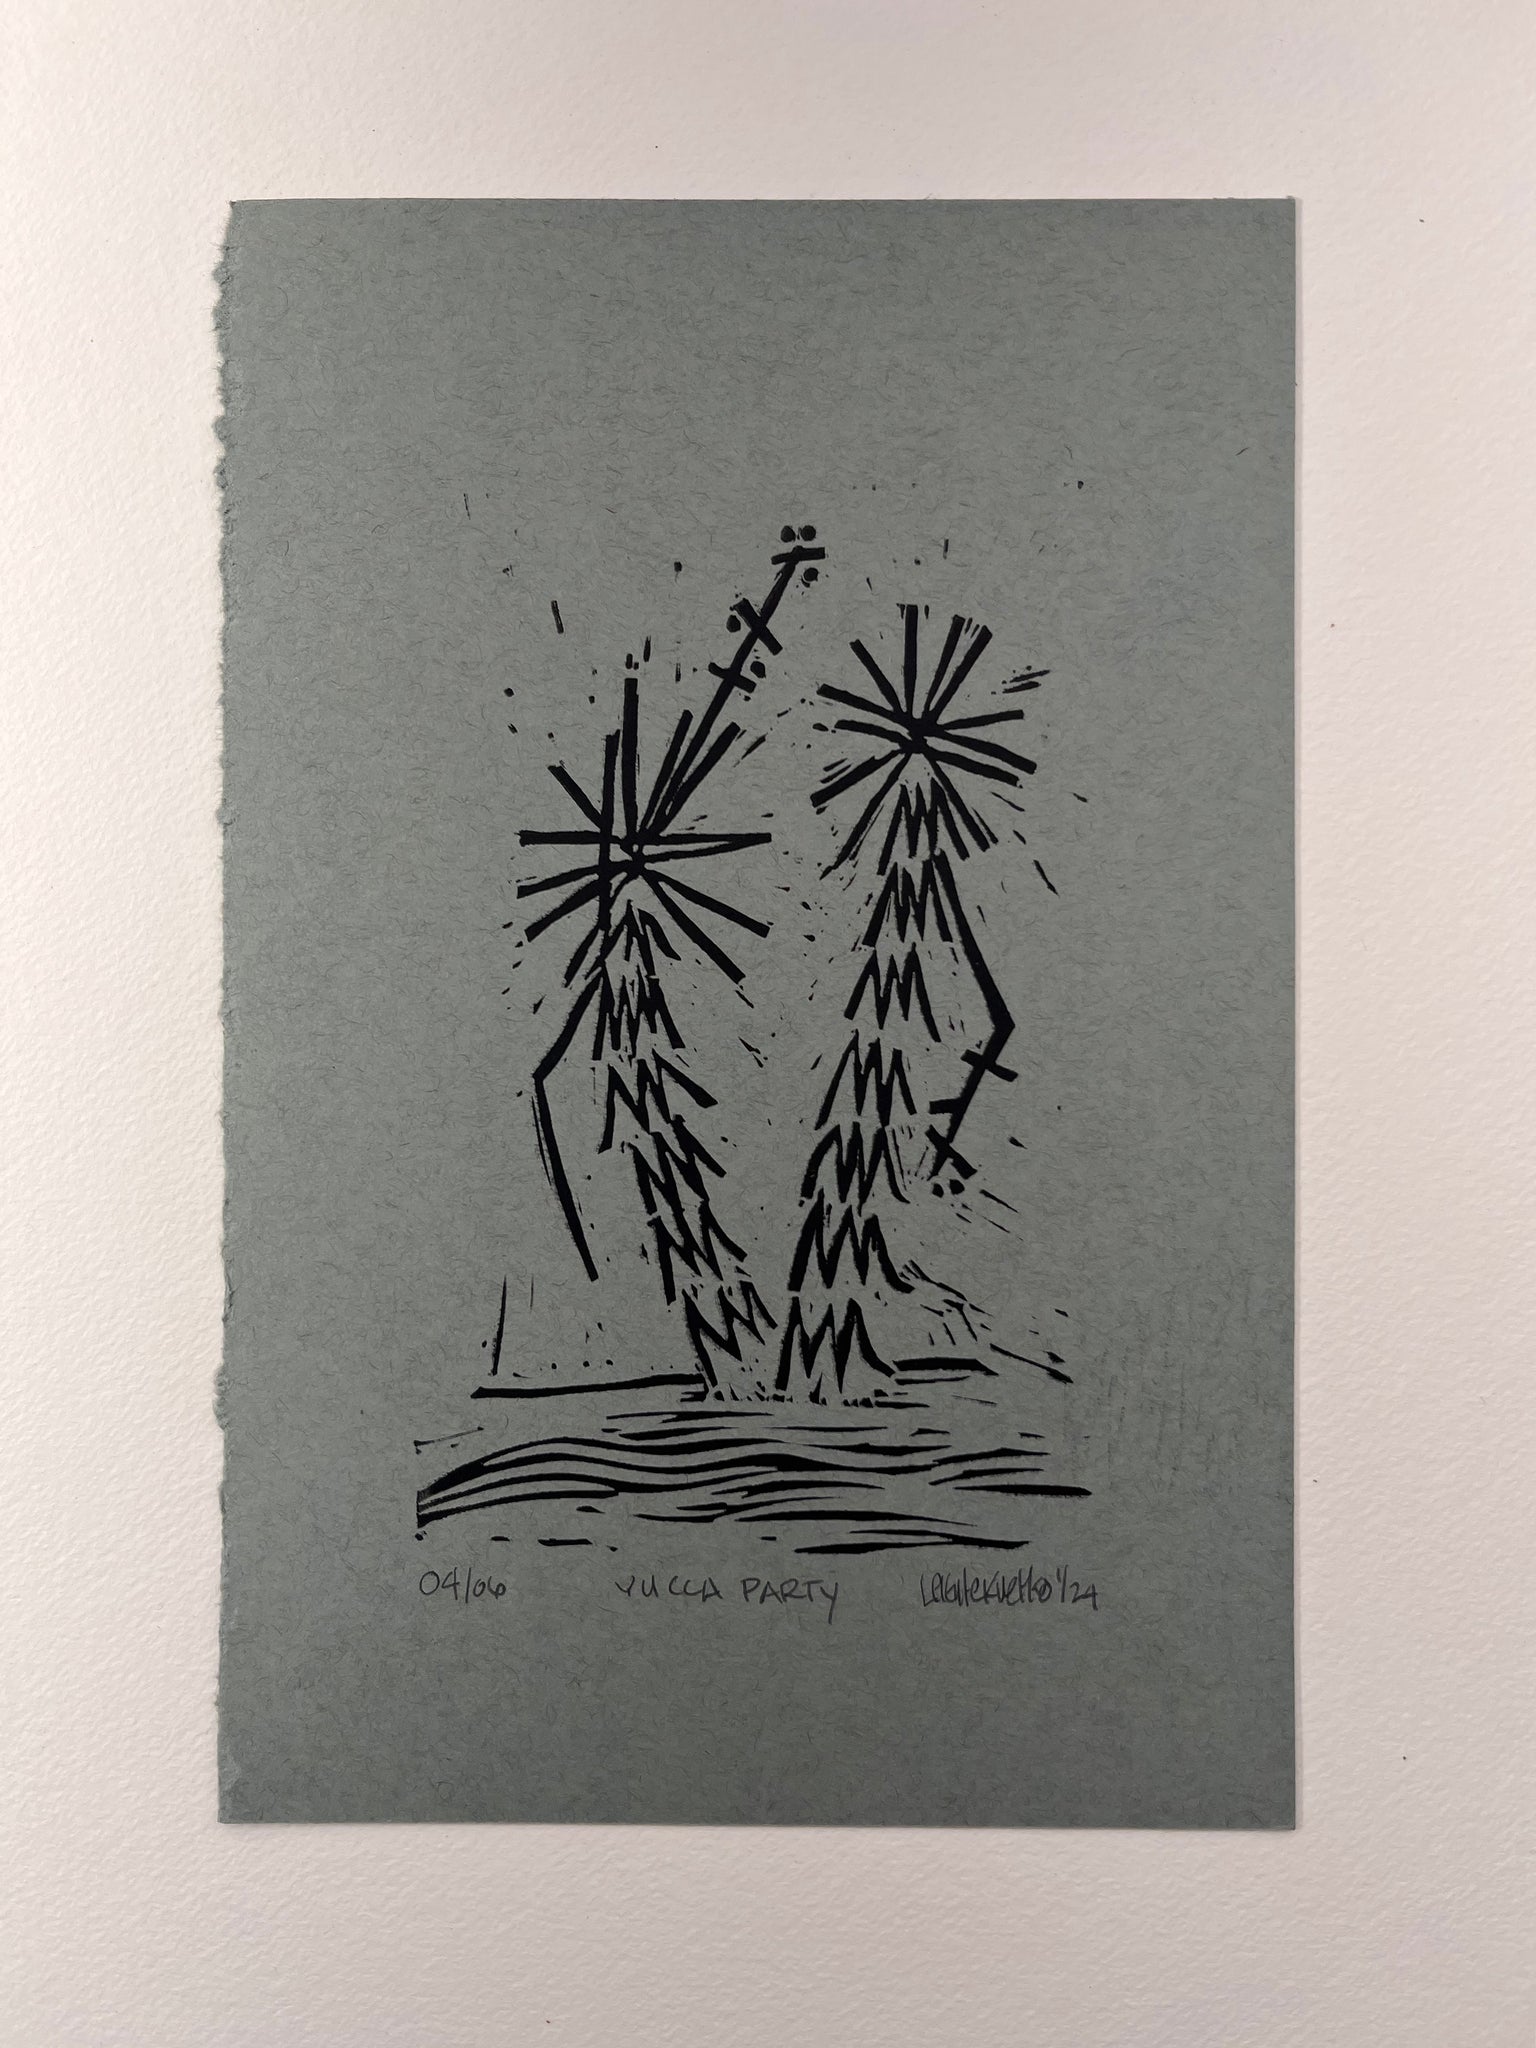 6 x 9 in Yucca Party print on blue paper